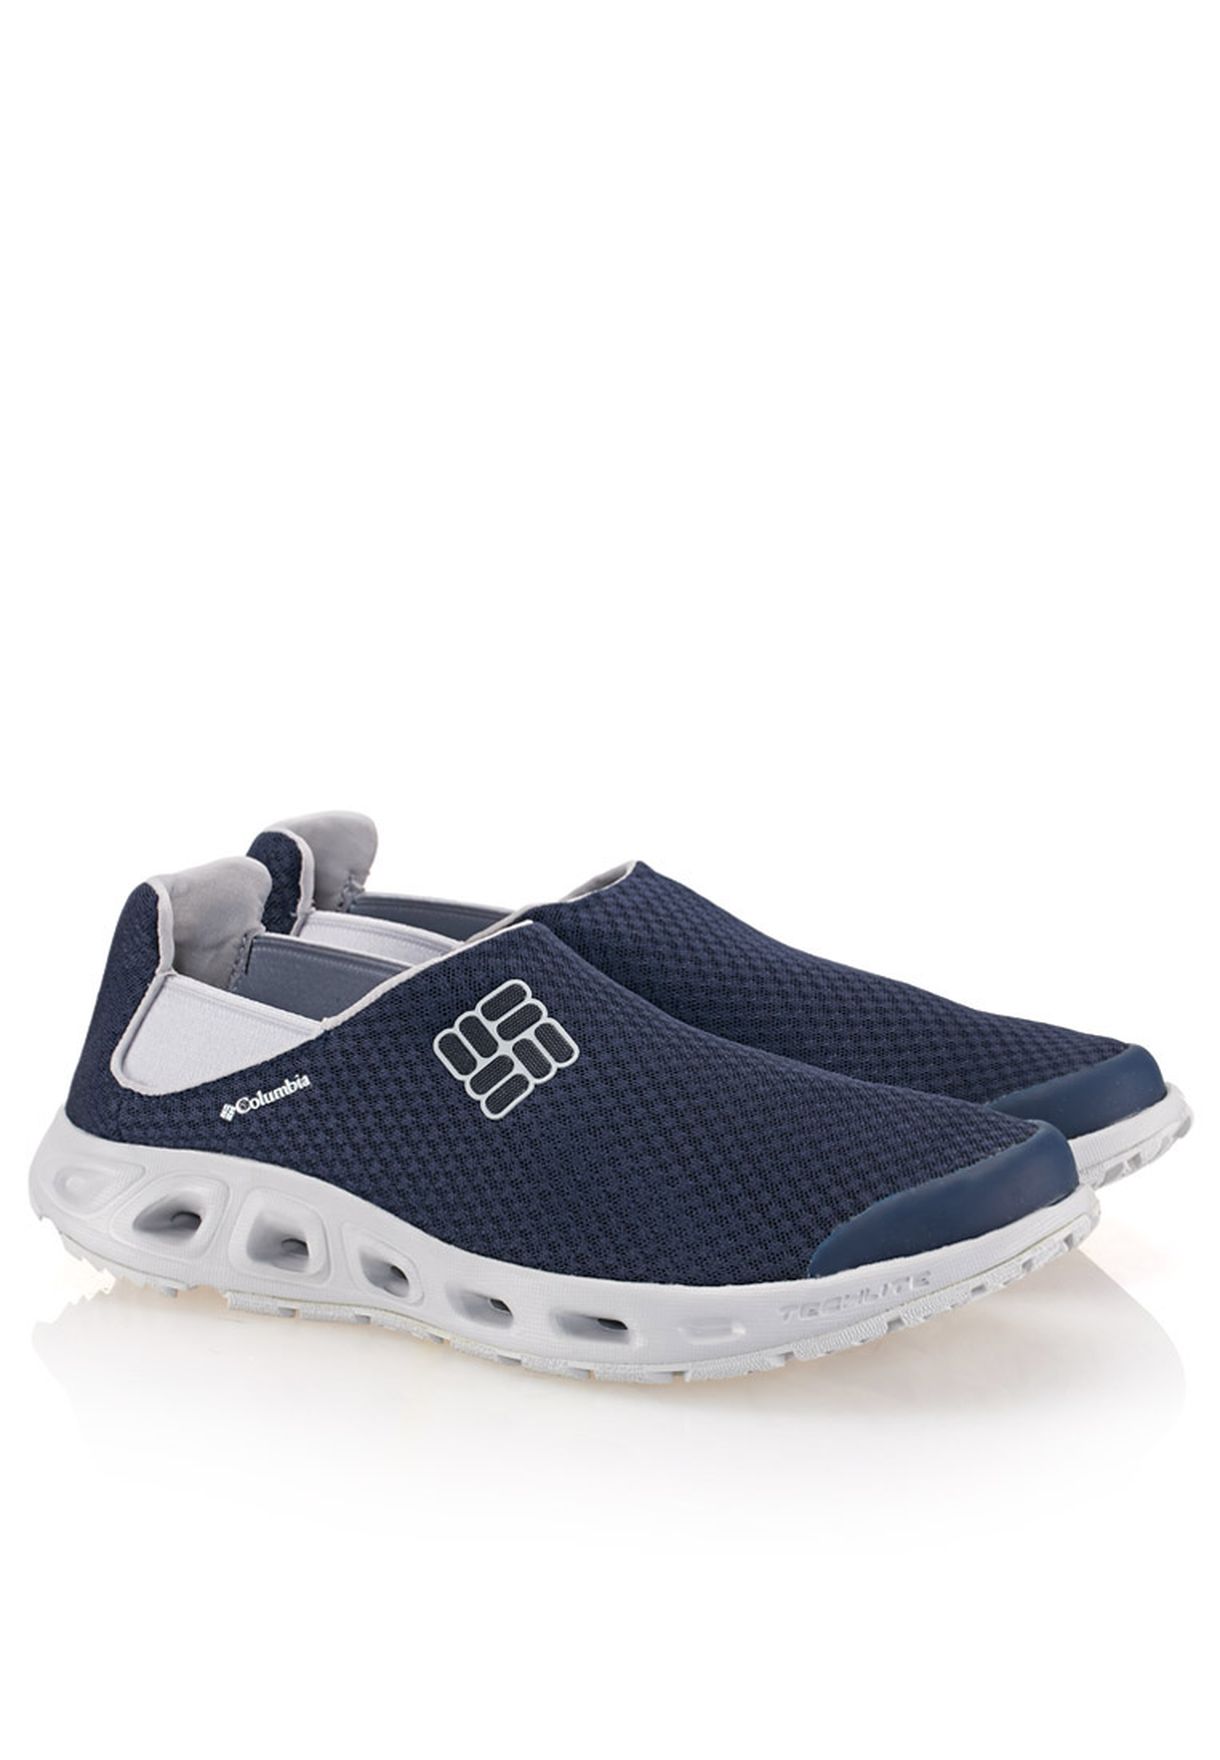 mens columbia slip on shoes